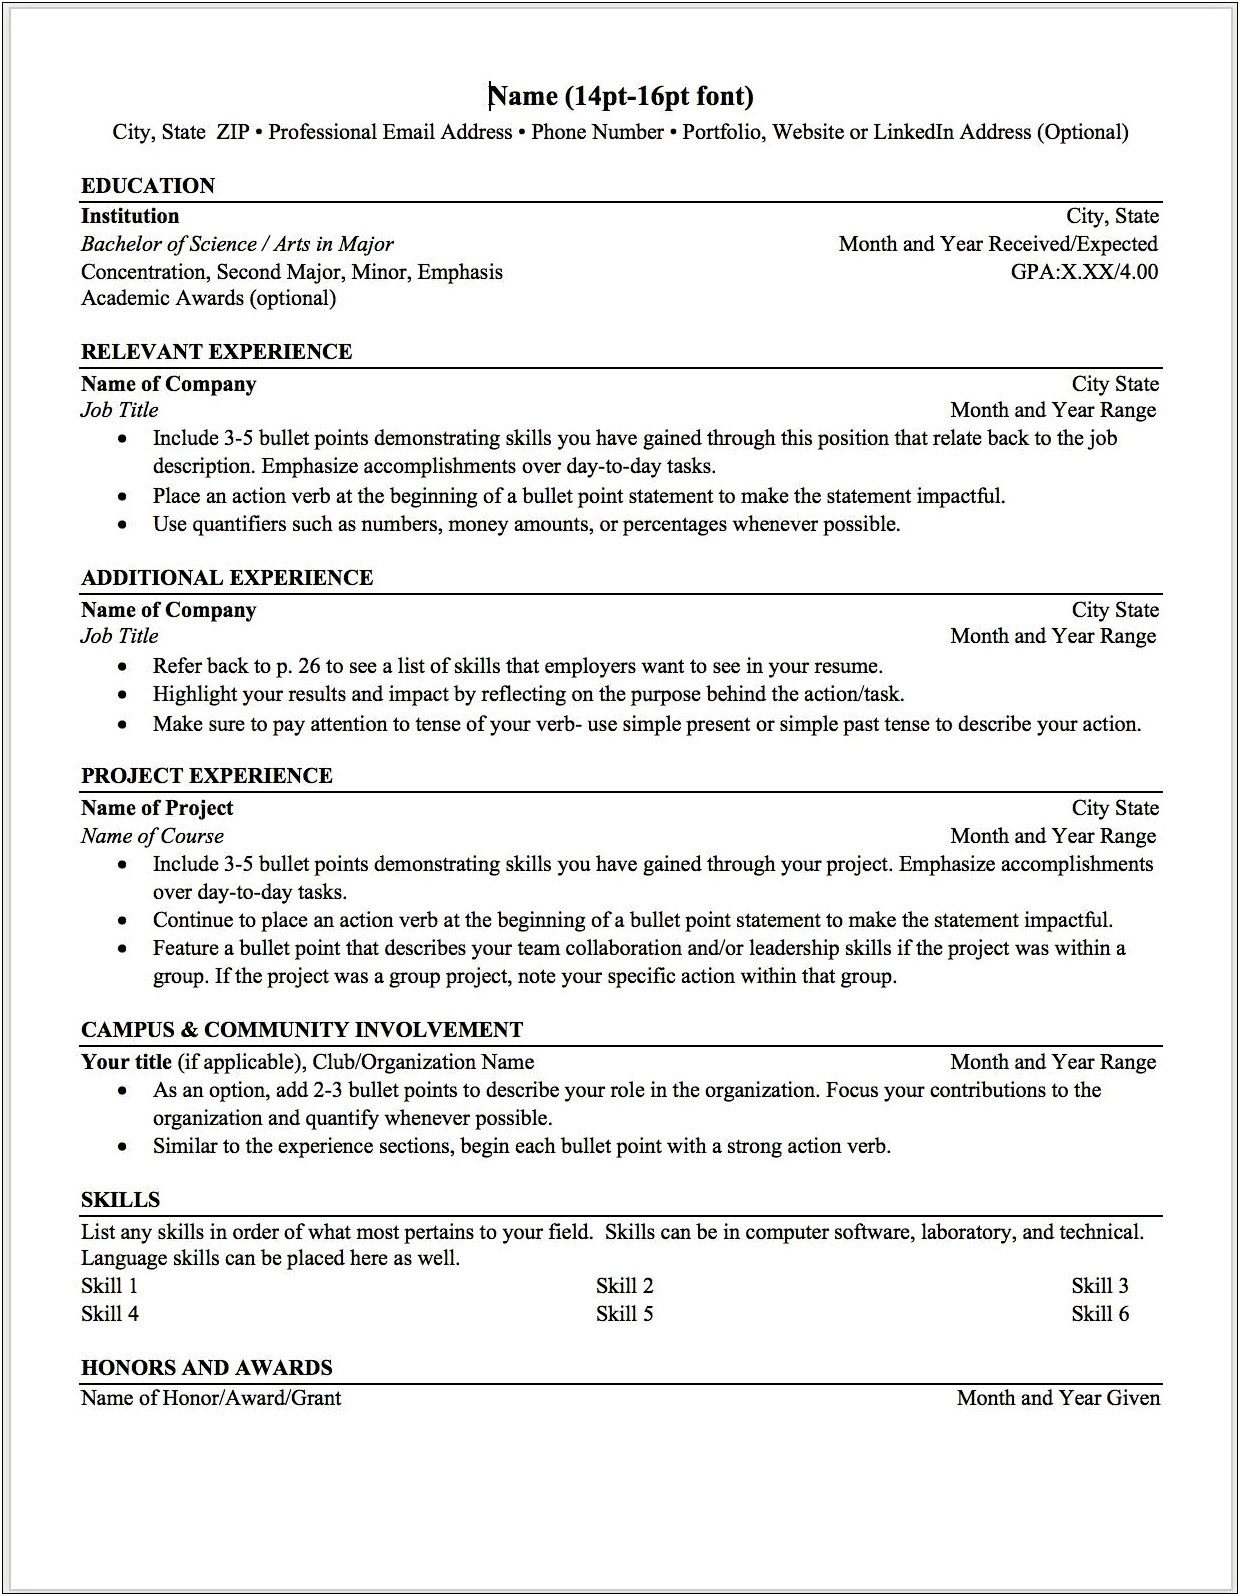 Current Job In Present Tense On Resume